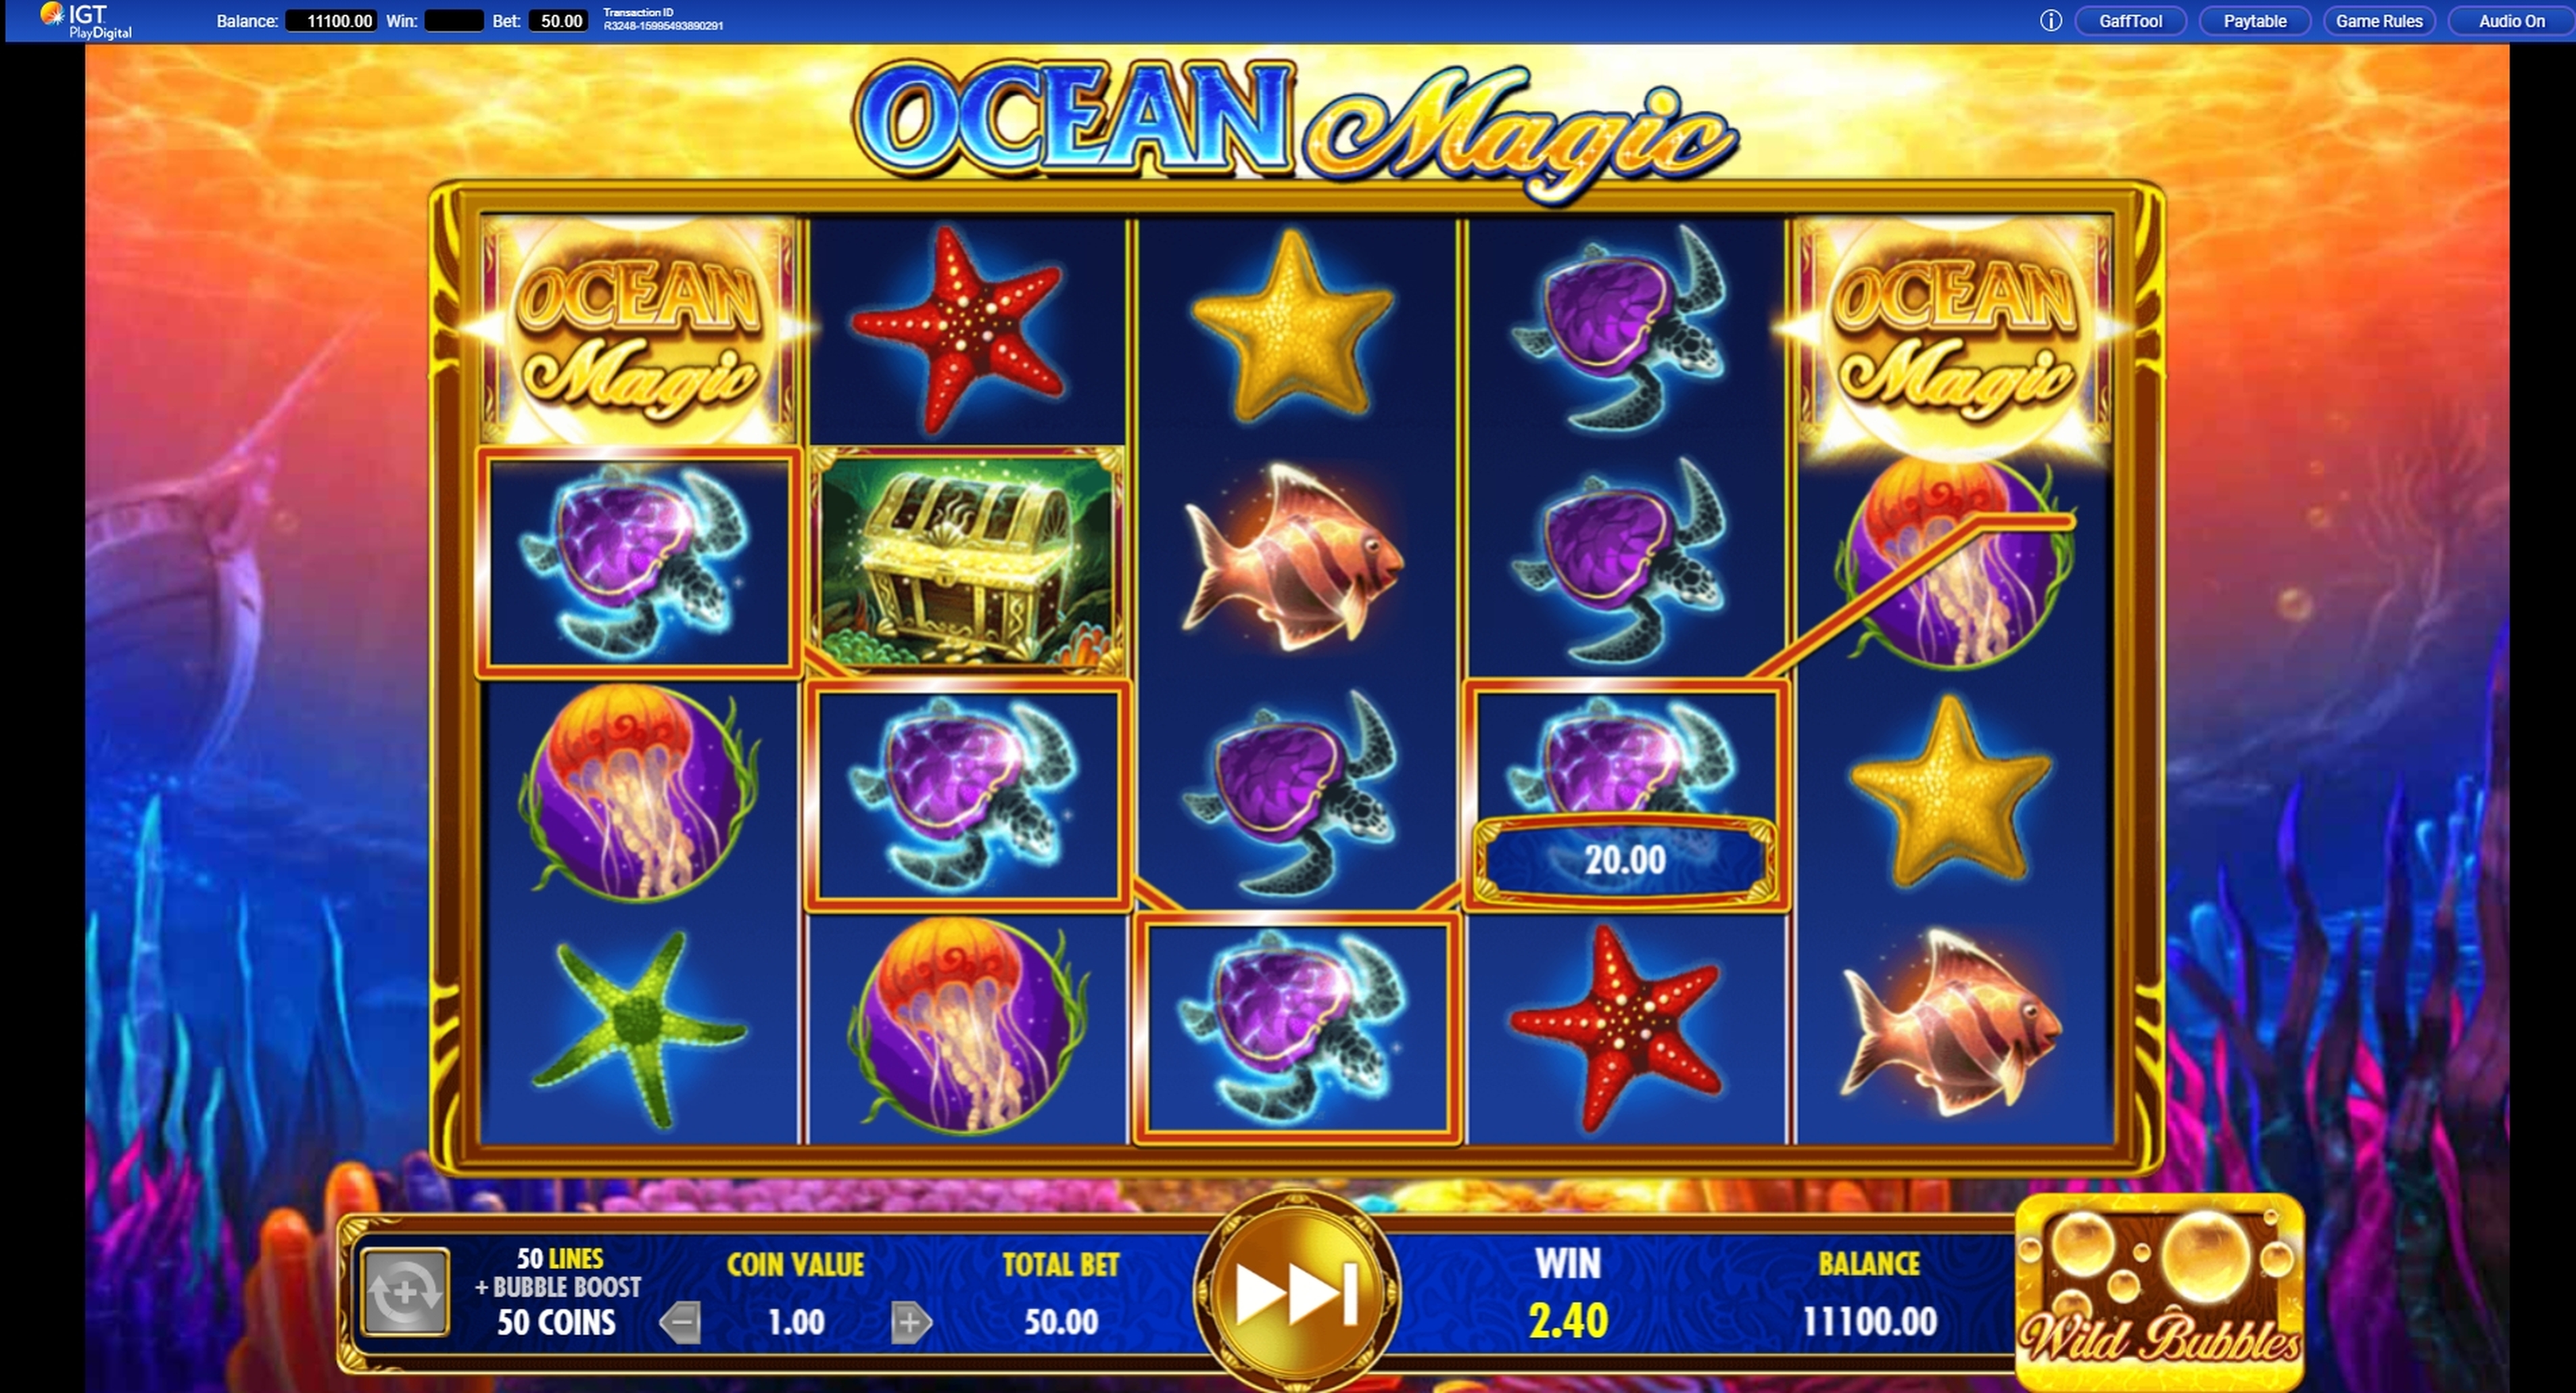 Win Money in Ocean Magic Free Slot Game by IGT